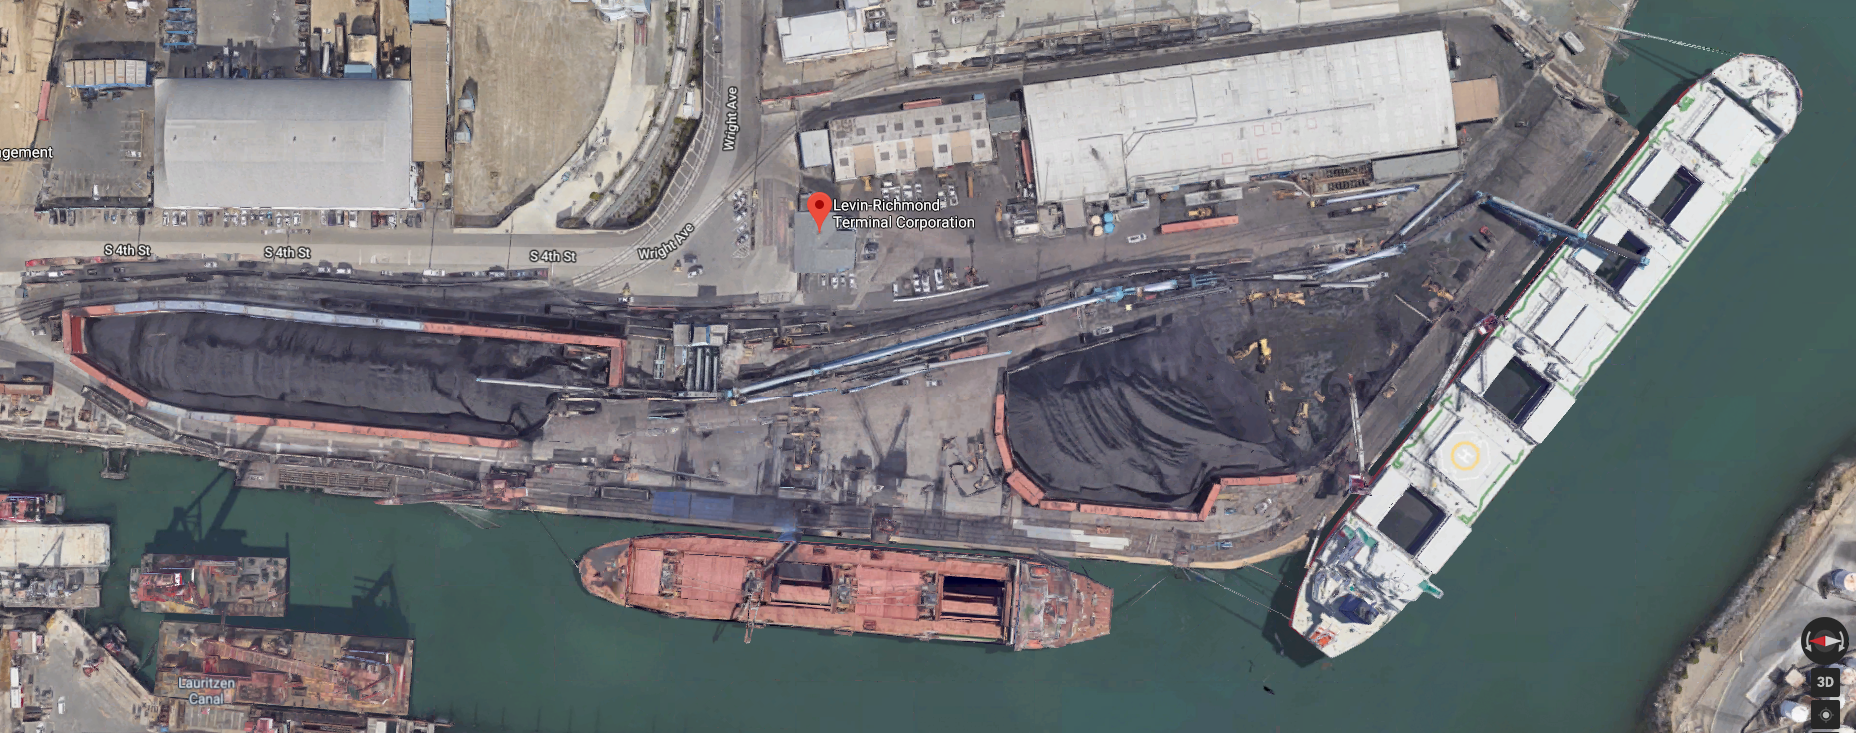 Open air coal handling at the Levin Terminal in Richmond, California less than a mile away from residential neighborhoods
(Courtesy of Google Maps)